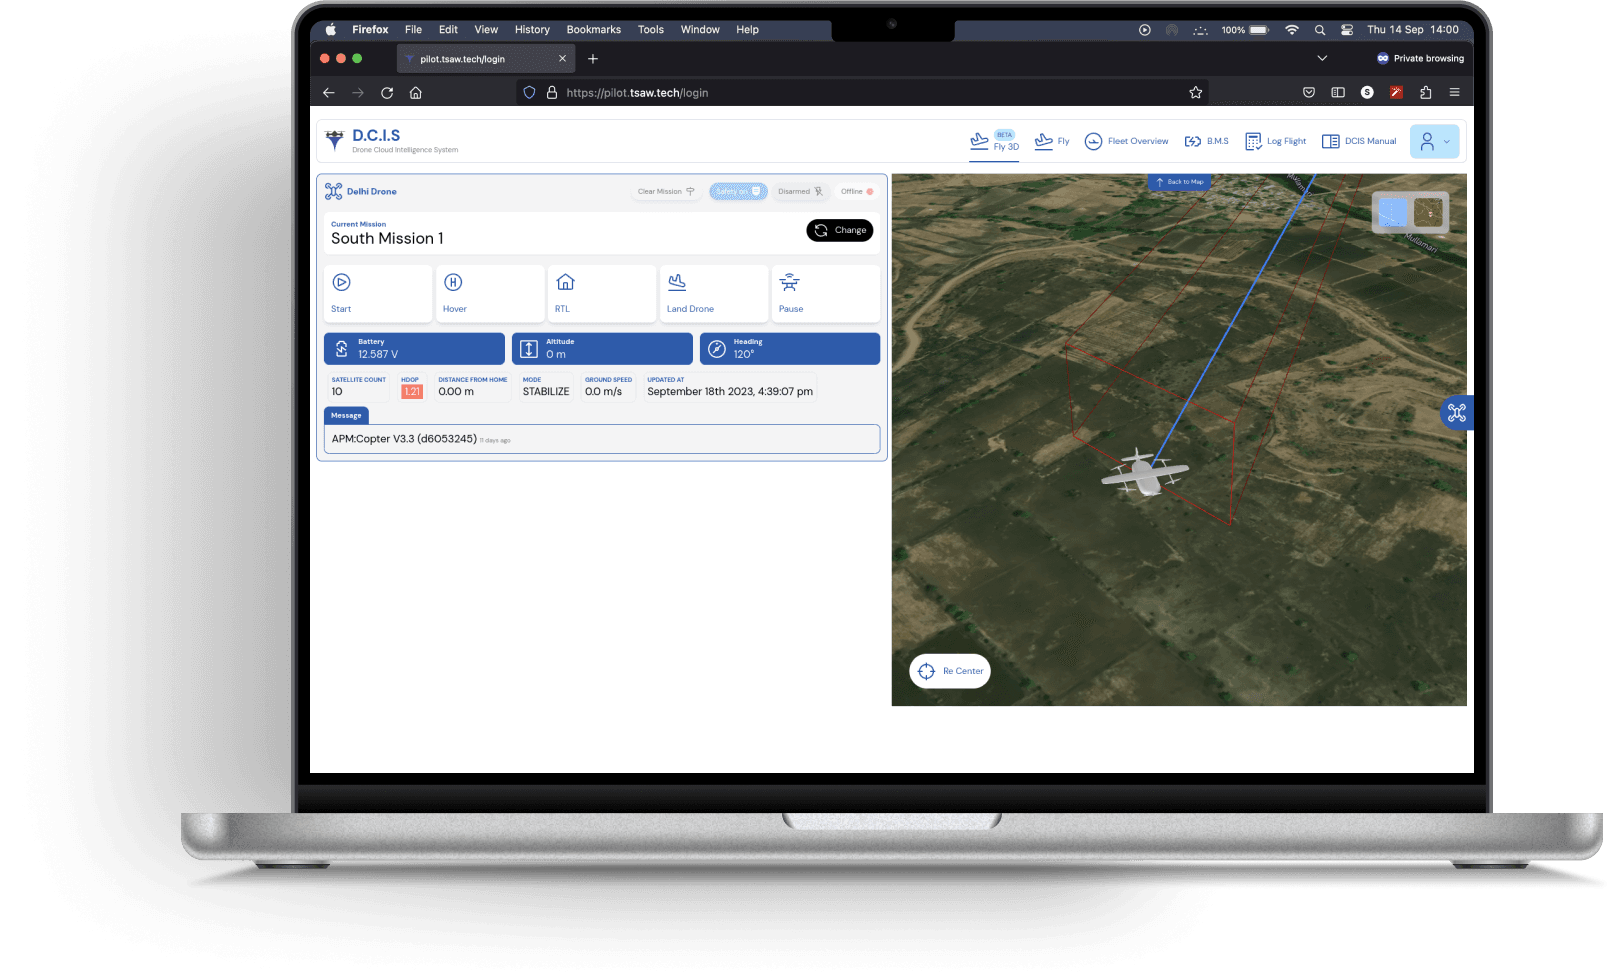 DCIS(Drone Cloud Intelligence System) developed by TSAW drones is a an advanced GCS(Ground Control System) which combines drone tech, cloud computing and AI(Artificial Intelligence) together. DCIS enables drones to be controlled over 4G giving real time flight data to drone pilots.